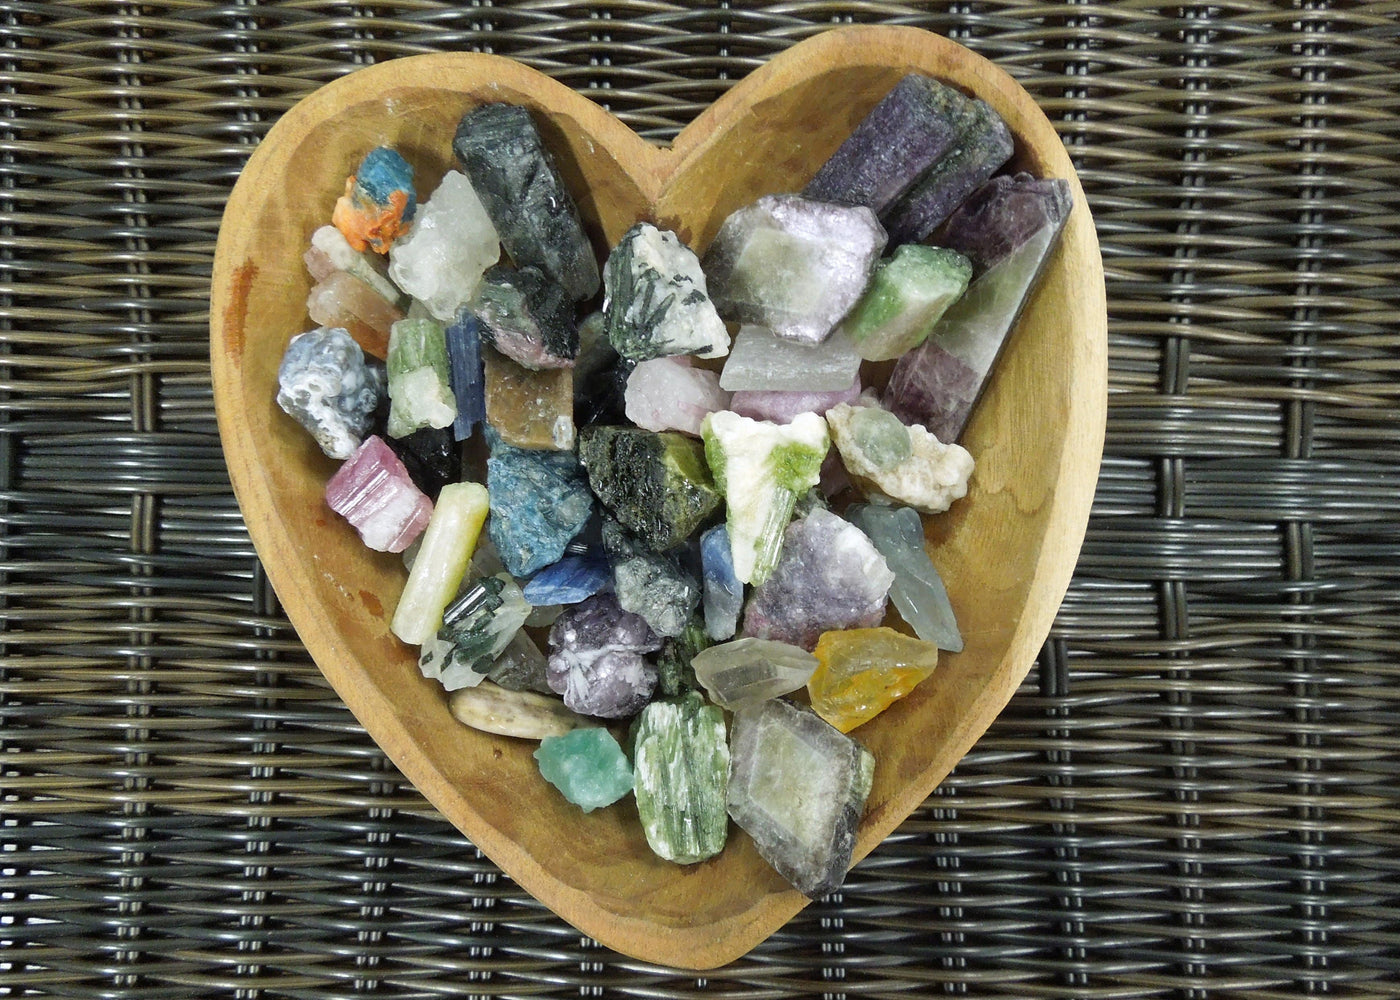 Assorted minerals in a heart shaped wood bowl.